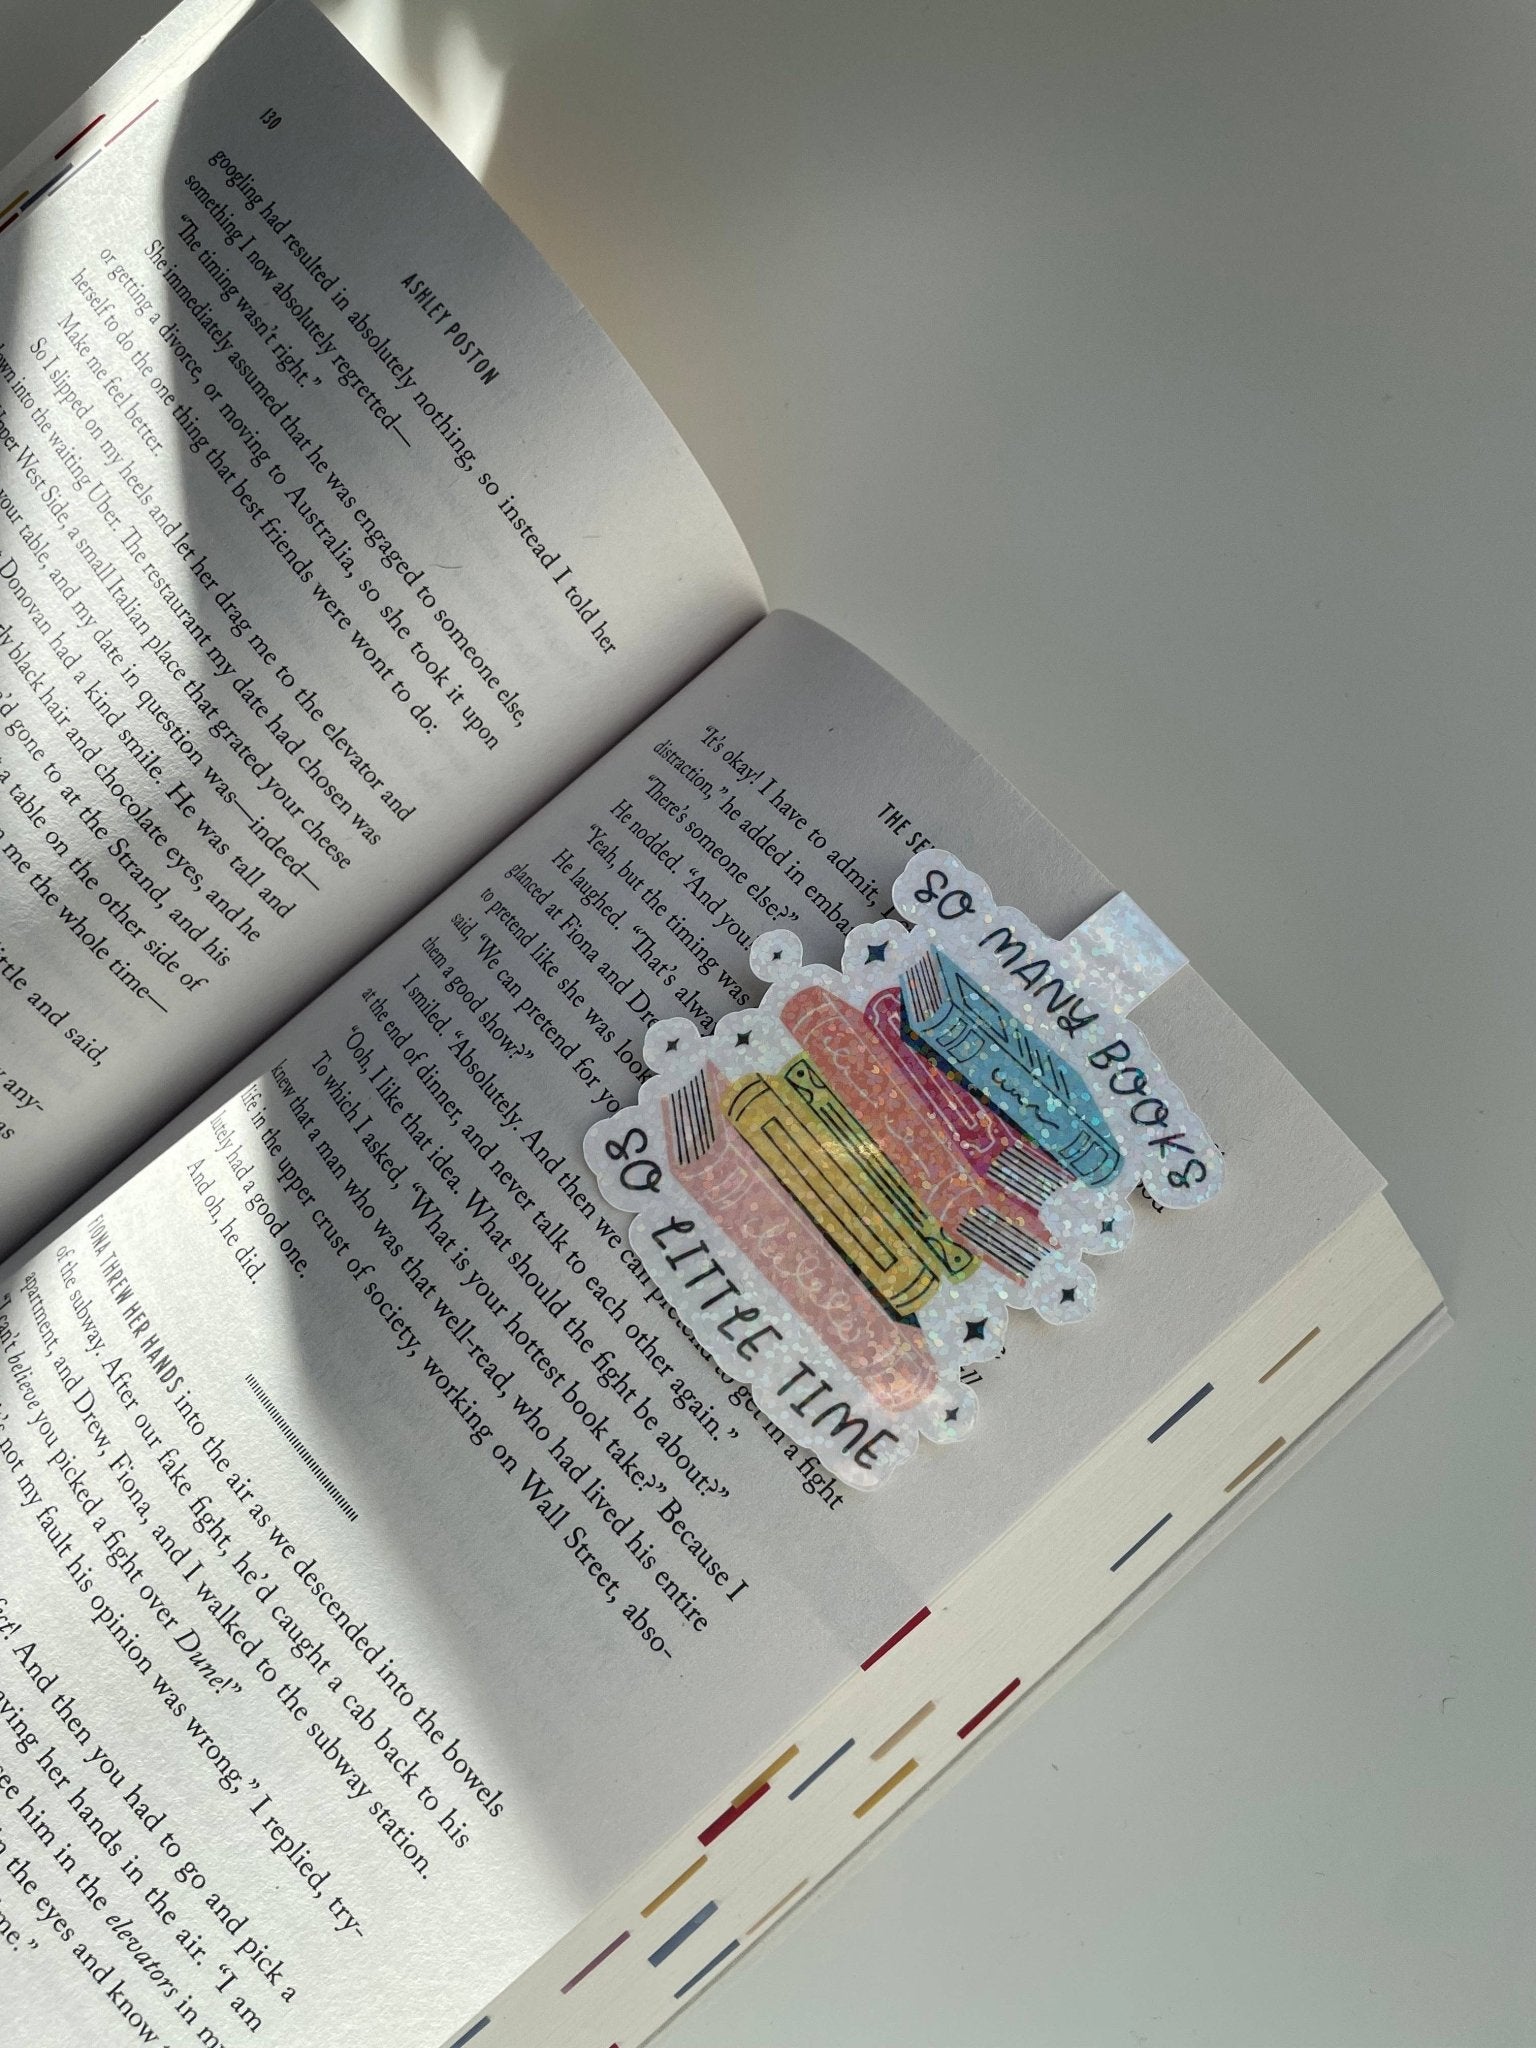 So Many Books So Little Time Magnetic Bookmark - Created By Kelci - Tuma's Books